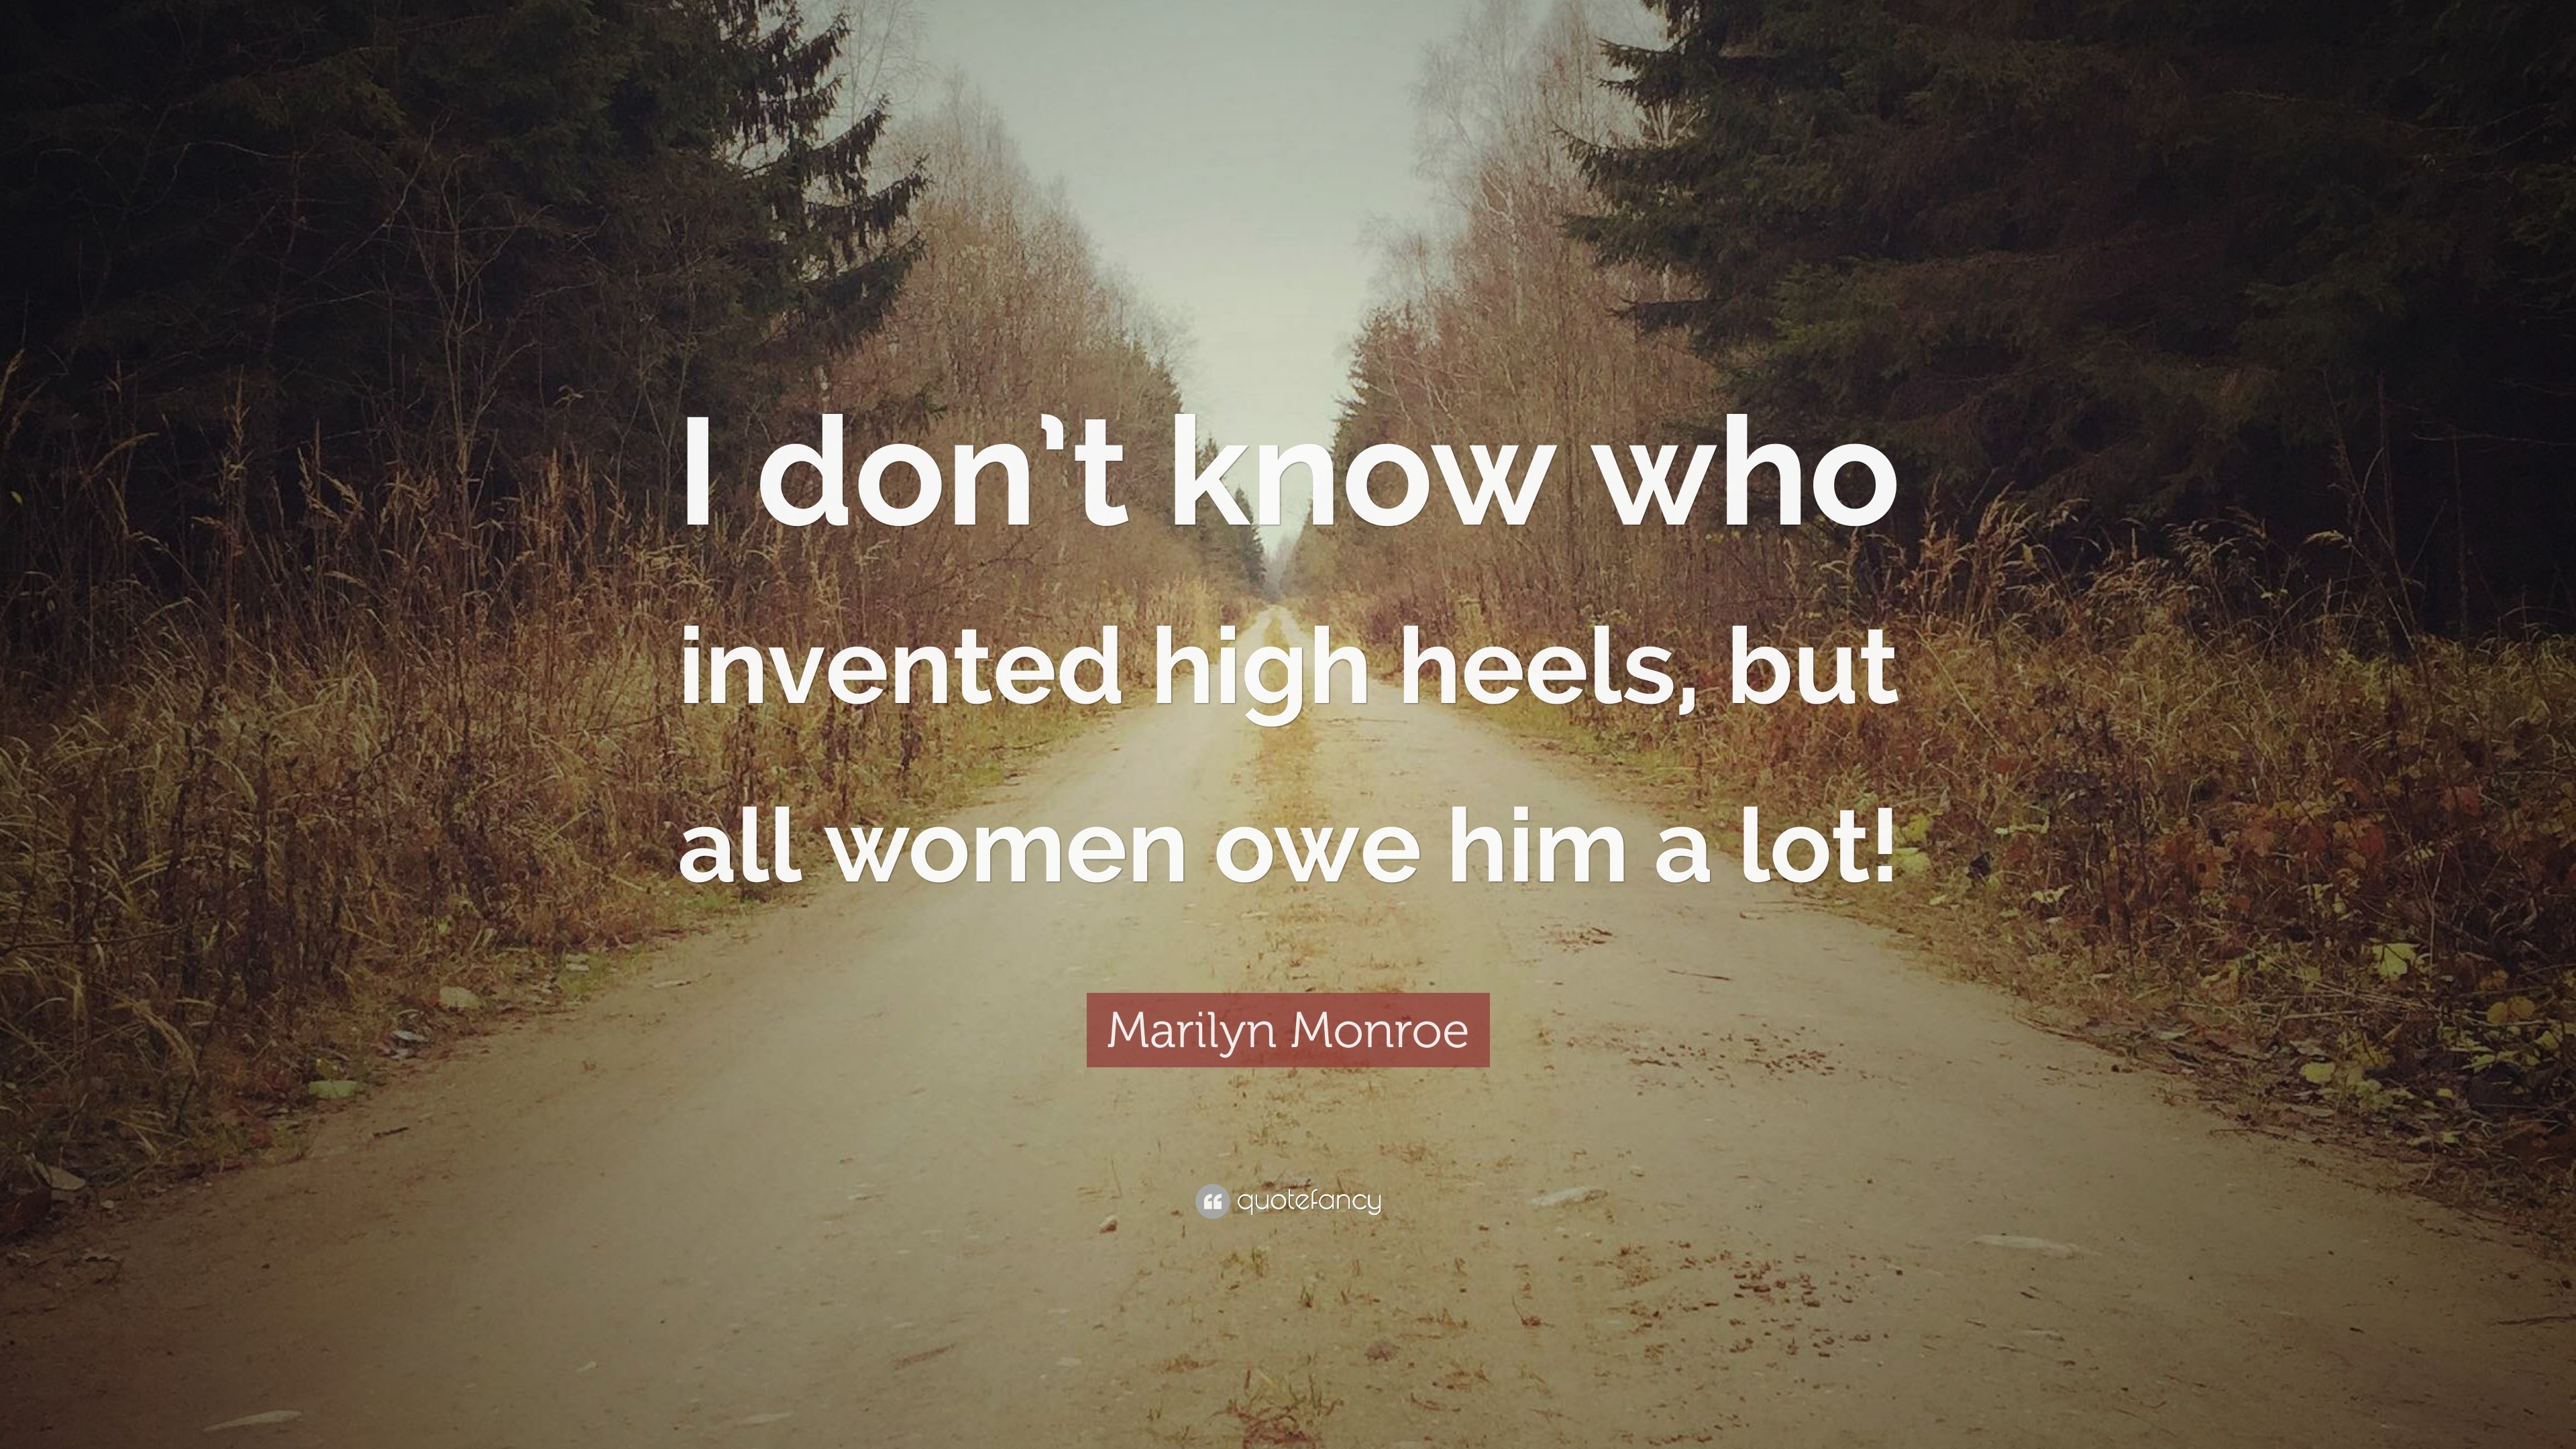 Marilyn Monroe Quote: “I don’t know who invented high heels, but all ...